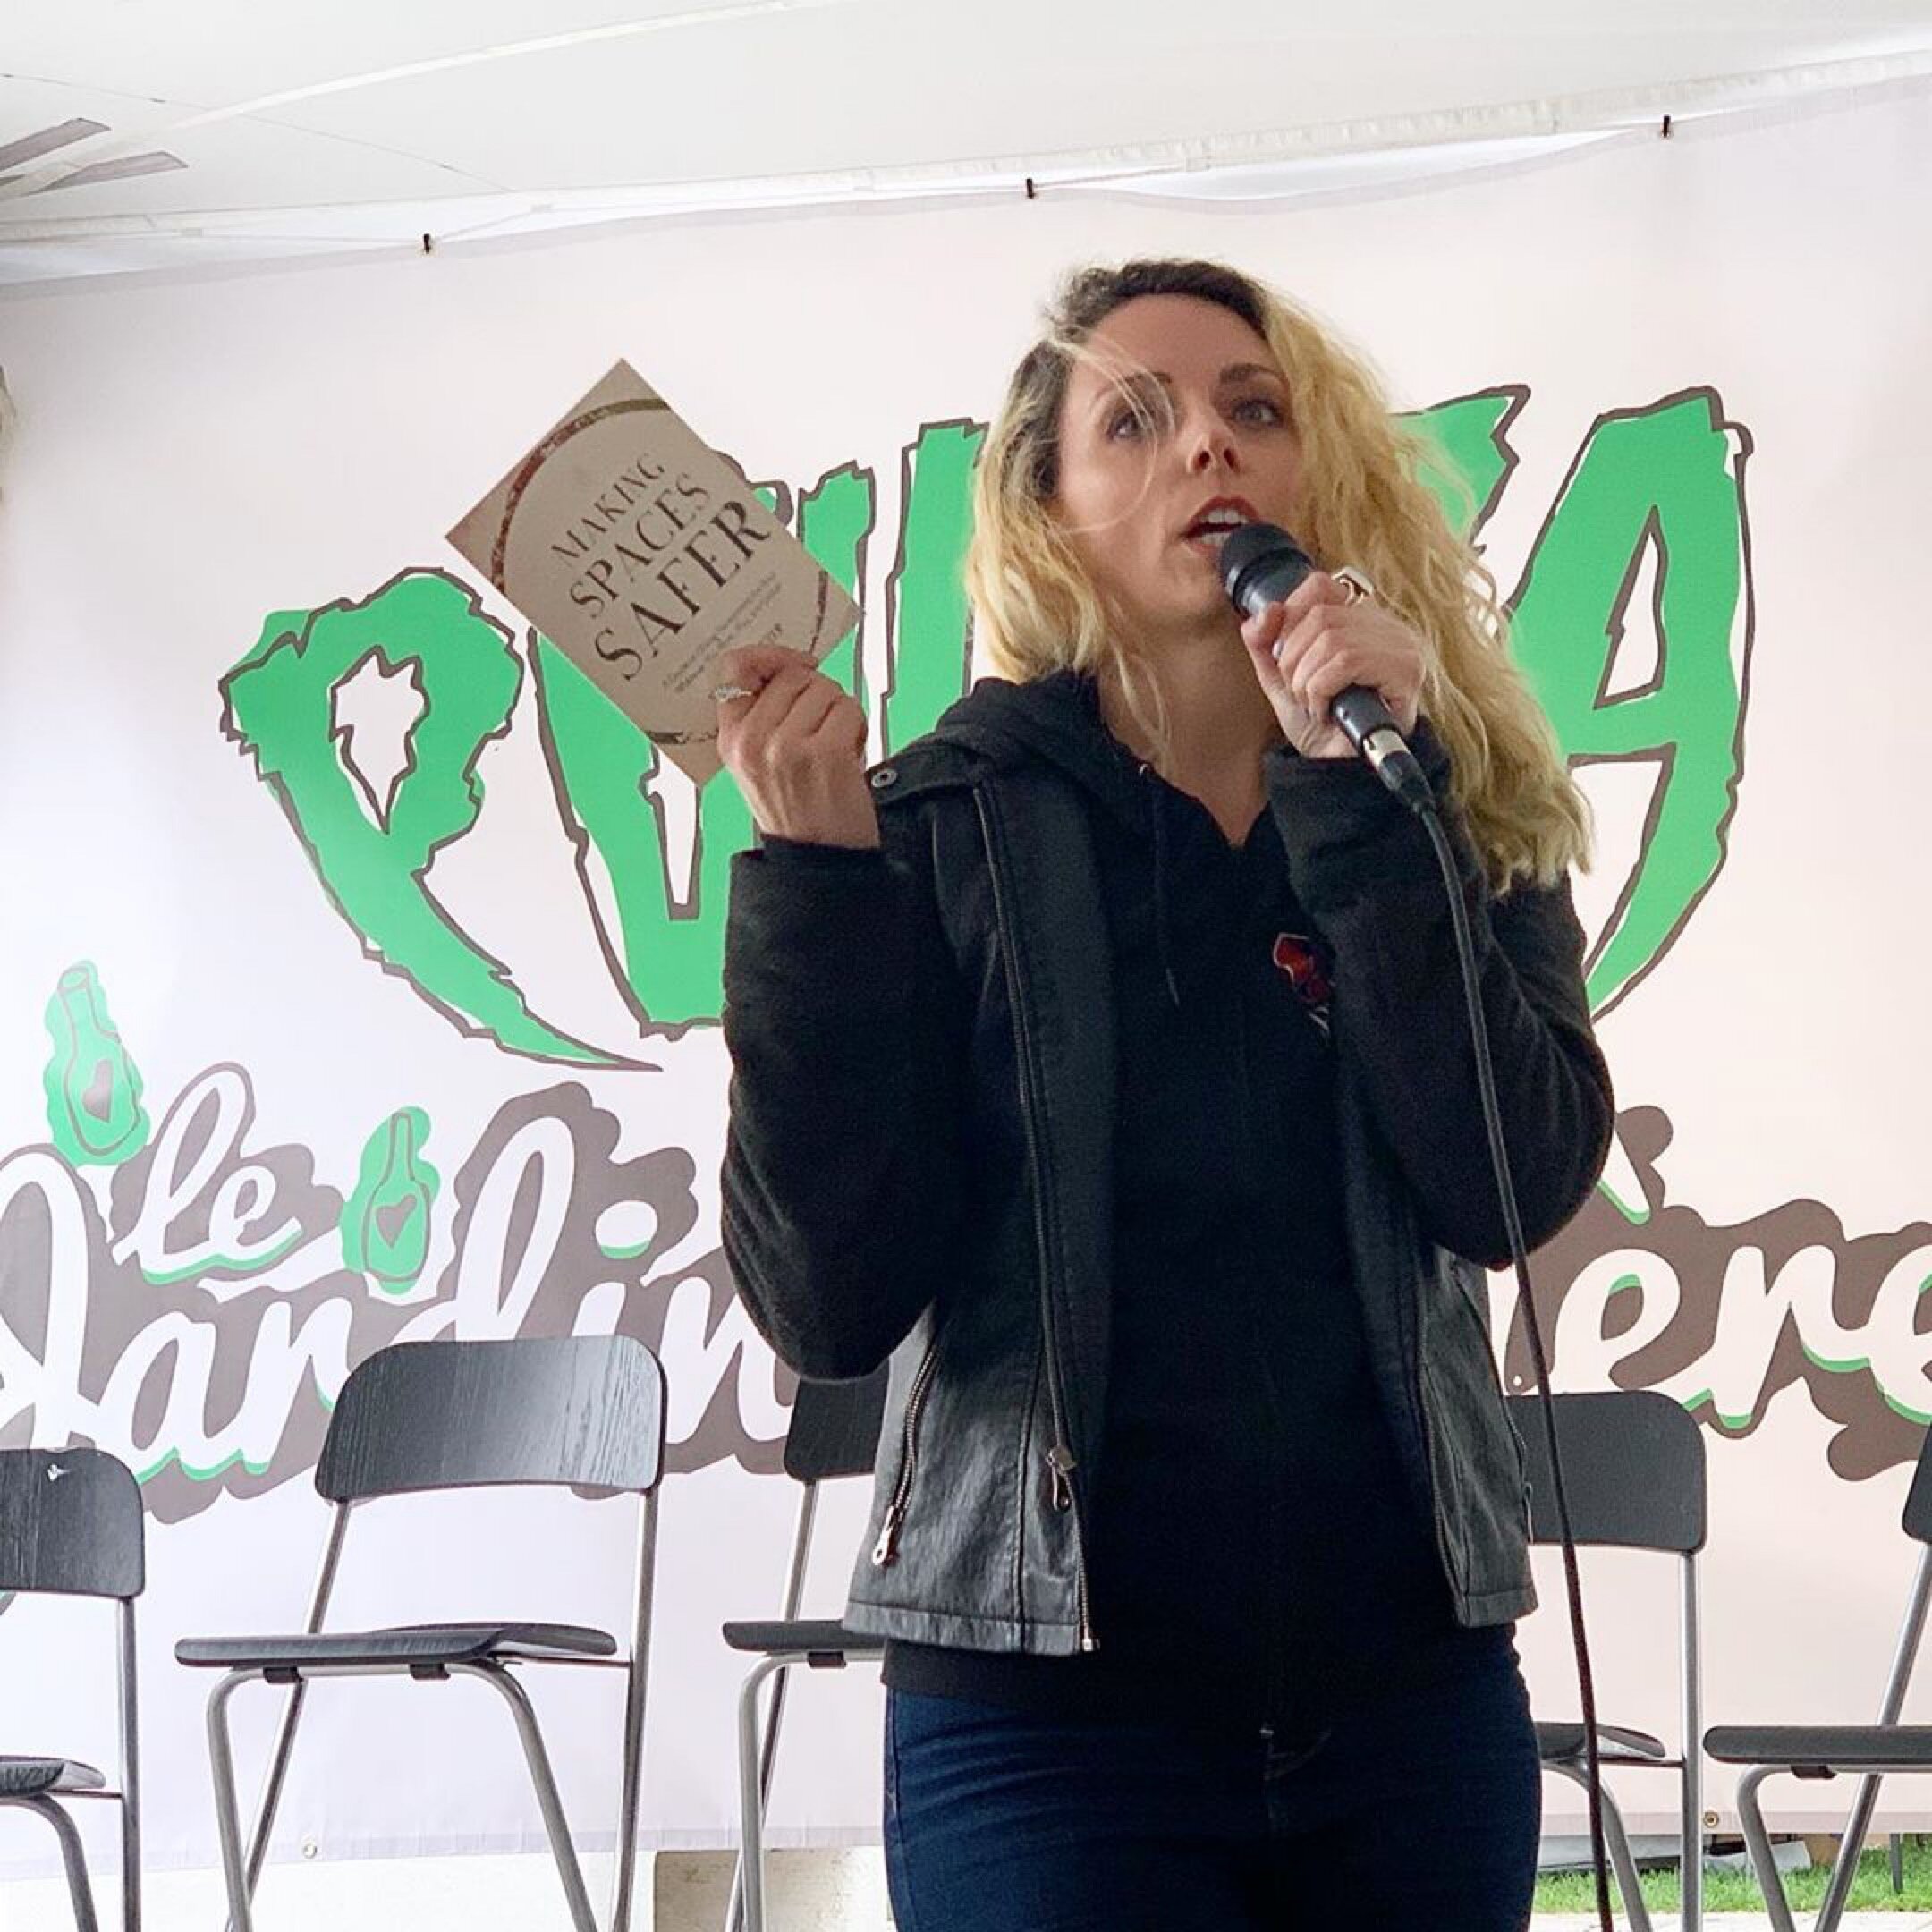 Shawna Potter holding up her book speaking into a microphone at Pouzza music festival in 2019..JPG